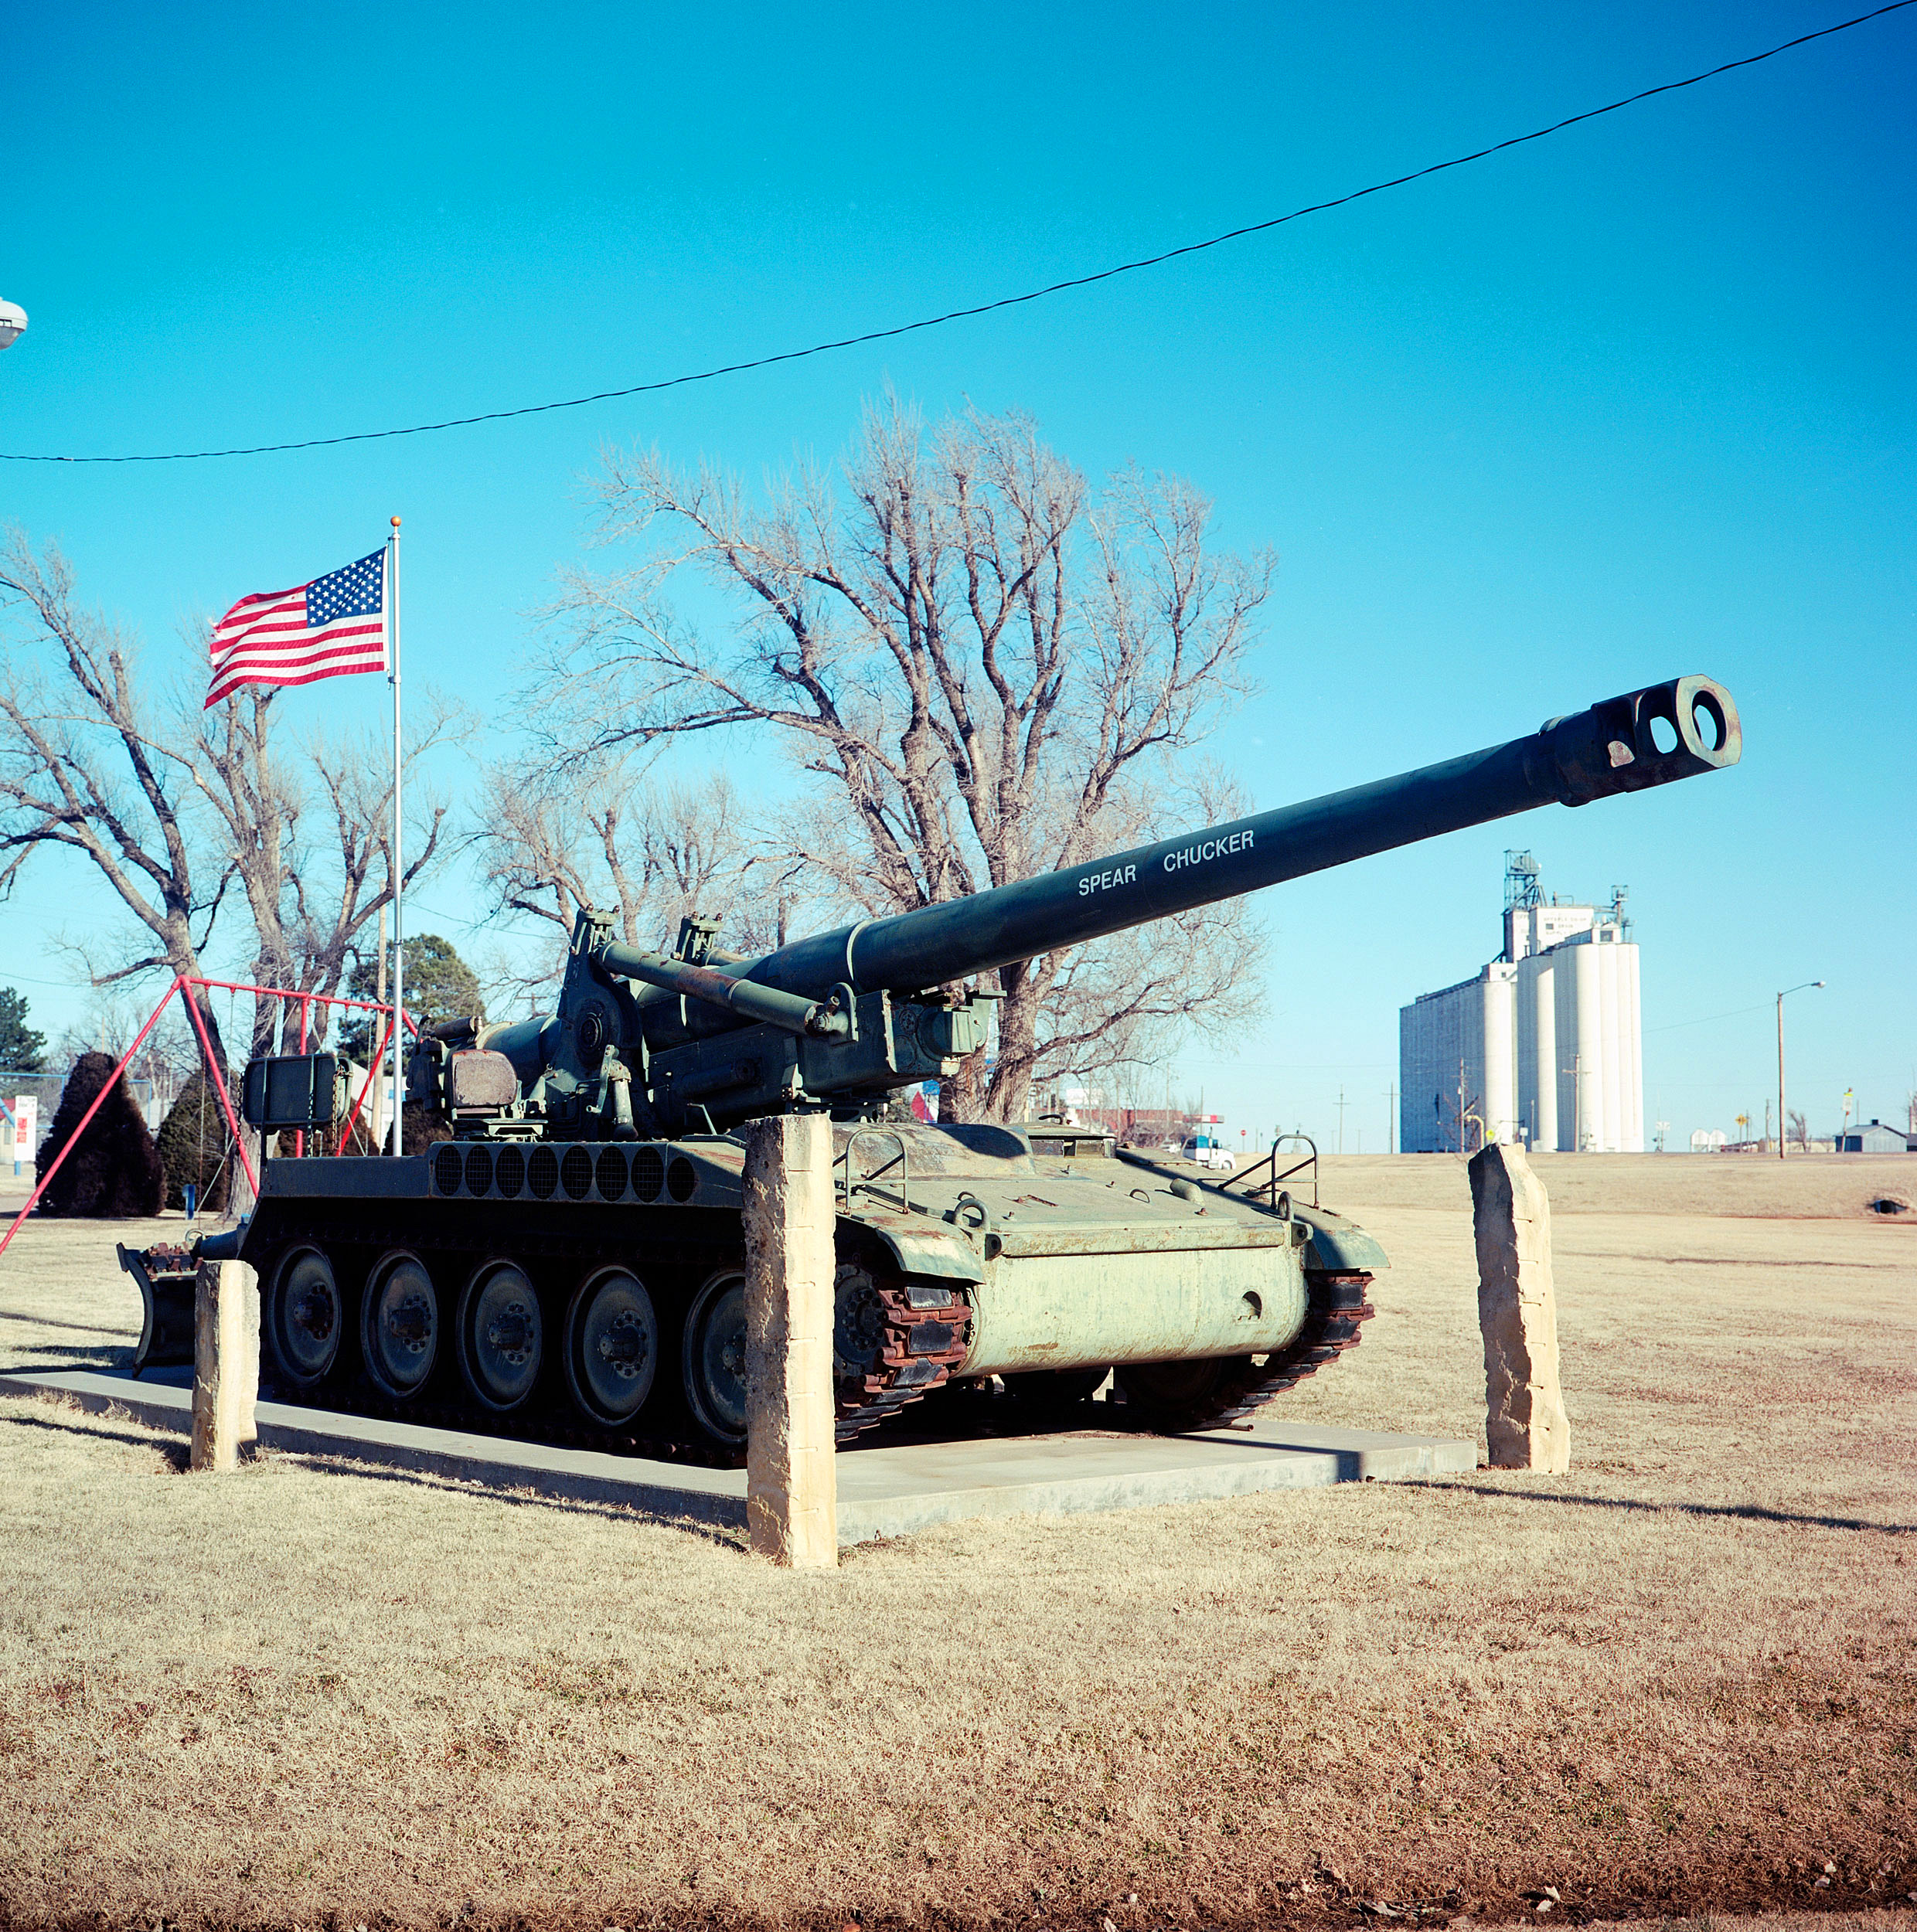  A decommissioned tank with the words “Spear Chucker” on the turret sits in the Offerle, Kansas city park. 